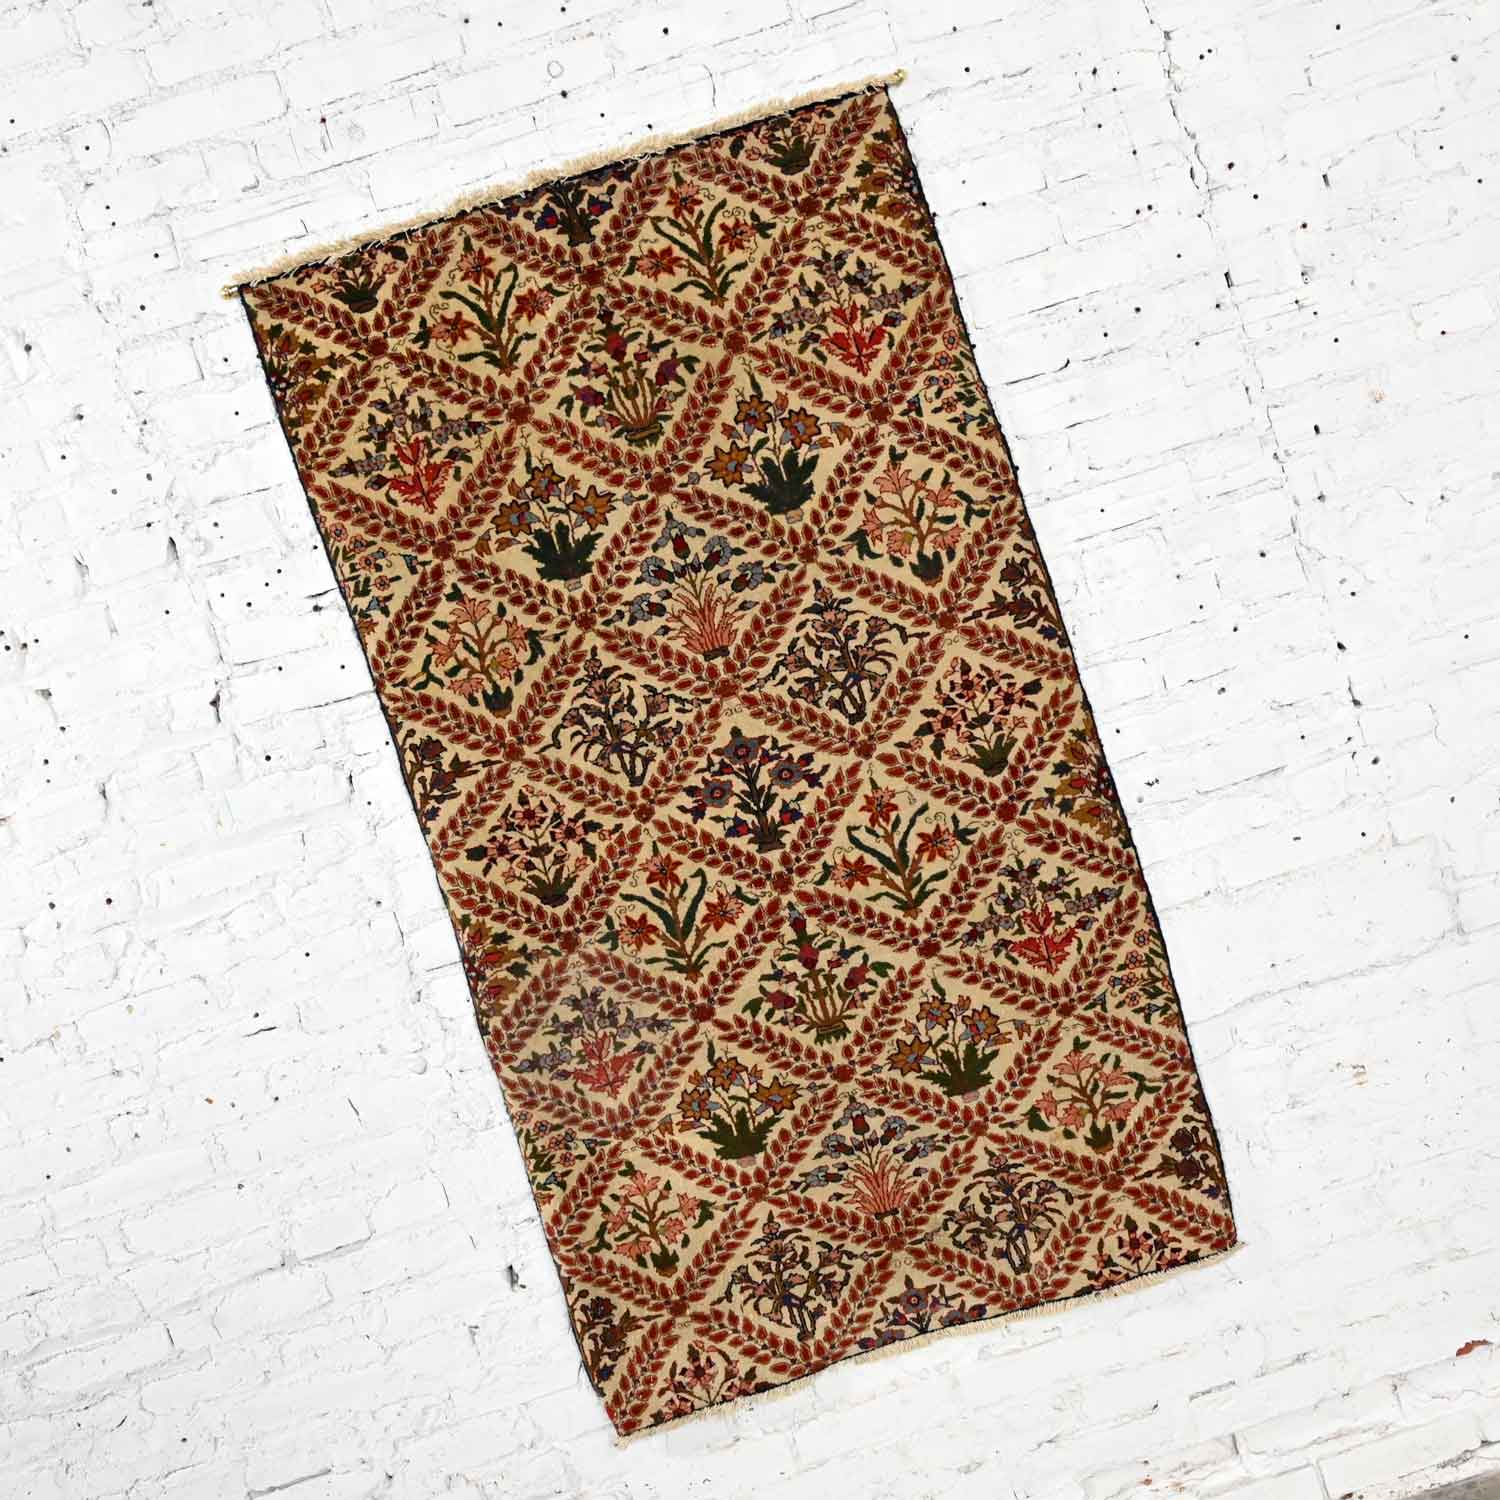 Antique Persian Oriental Hand Woven Wool on Cotton Diamond Leaf & Floral Rug Wall Hanging